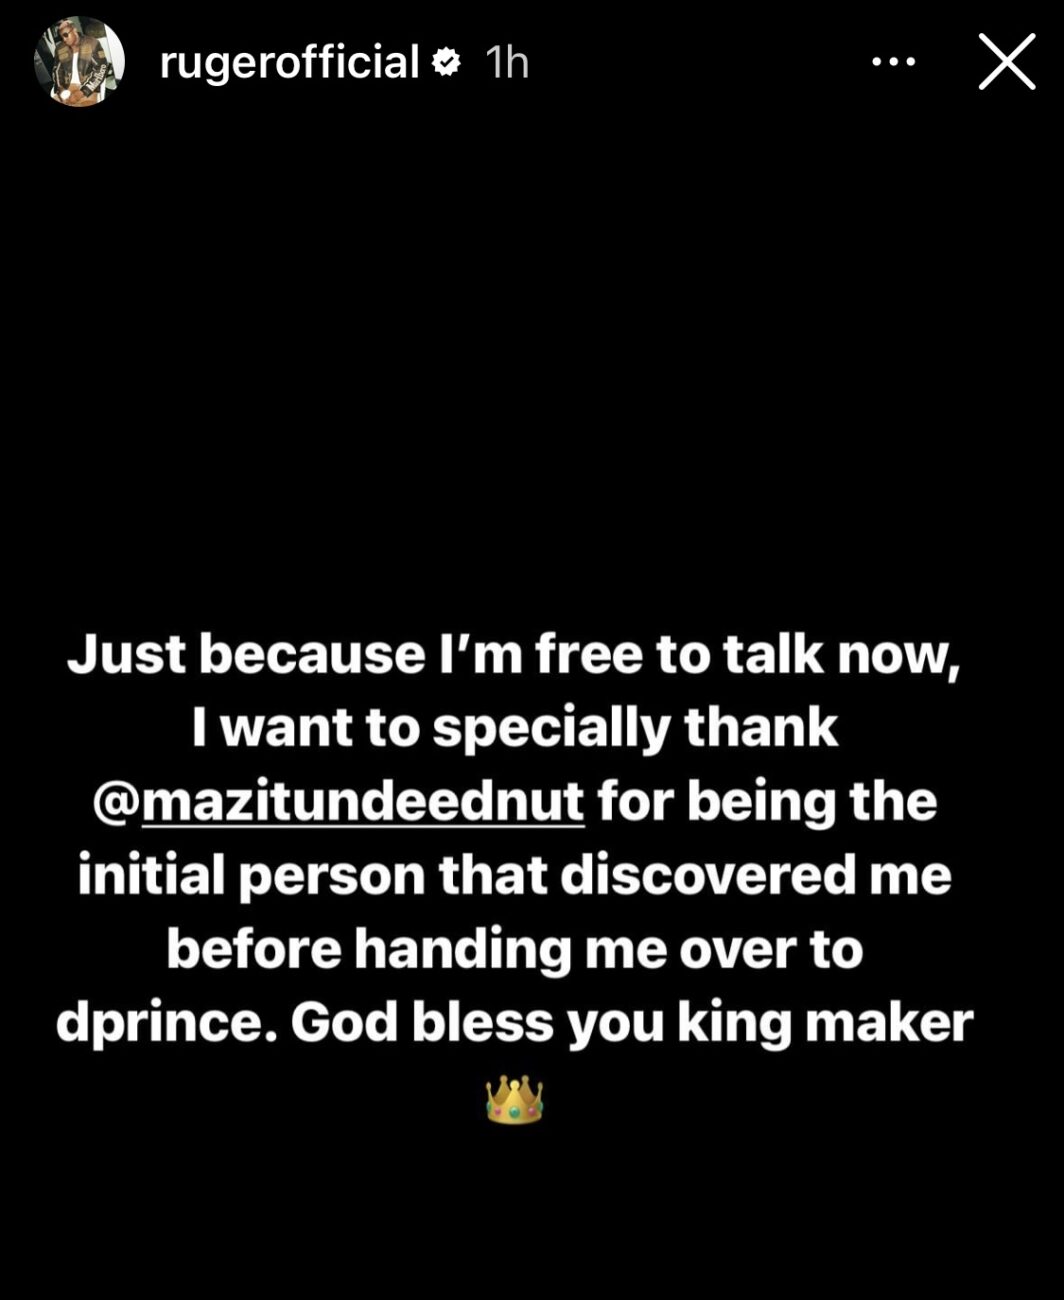 Ruger’s post thanking Tunde Ednut for discovering him.